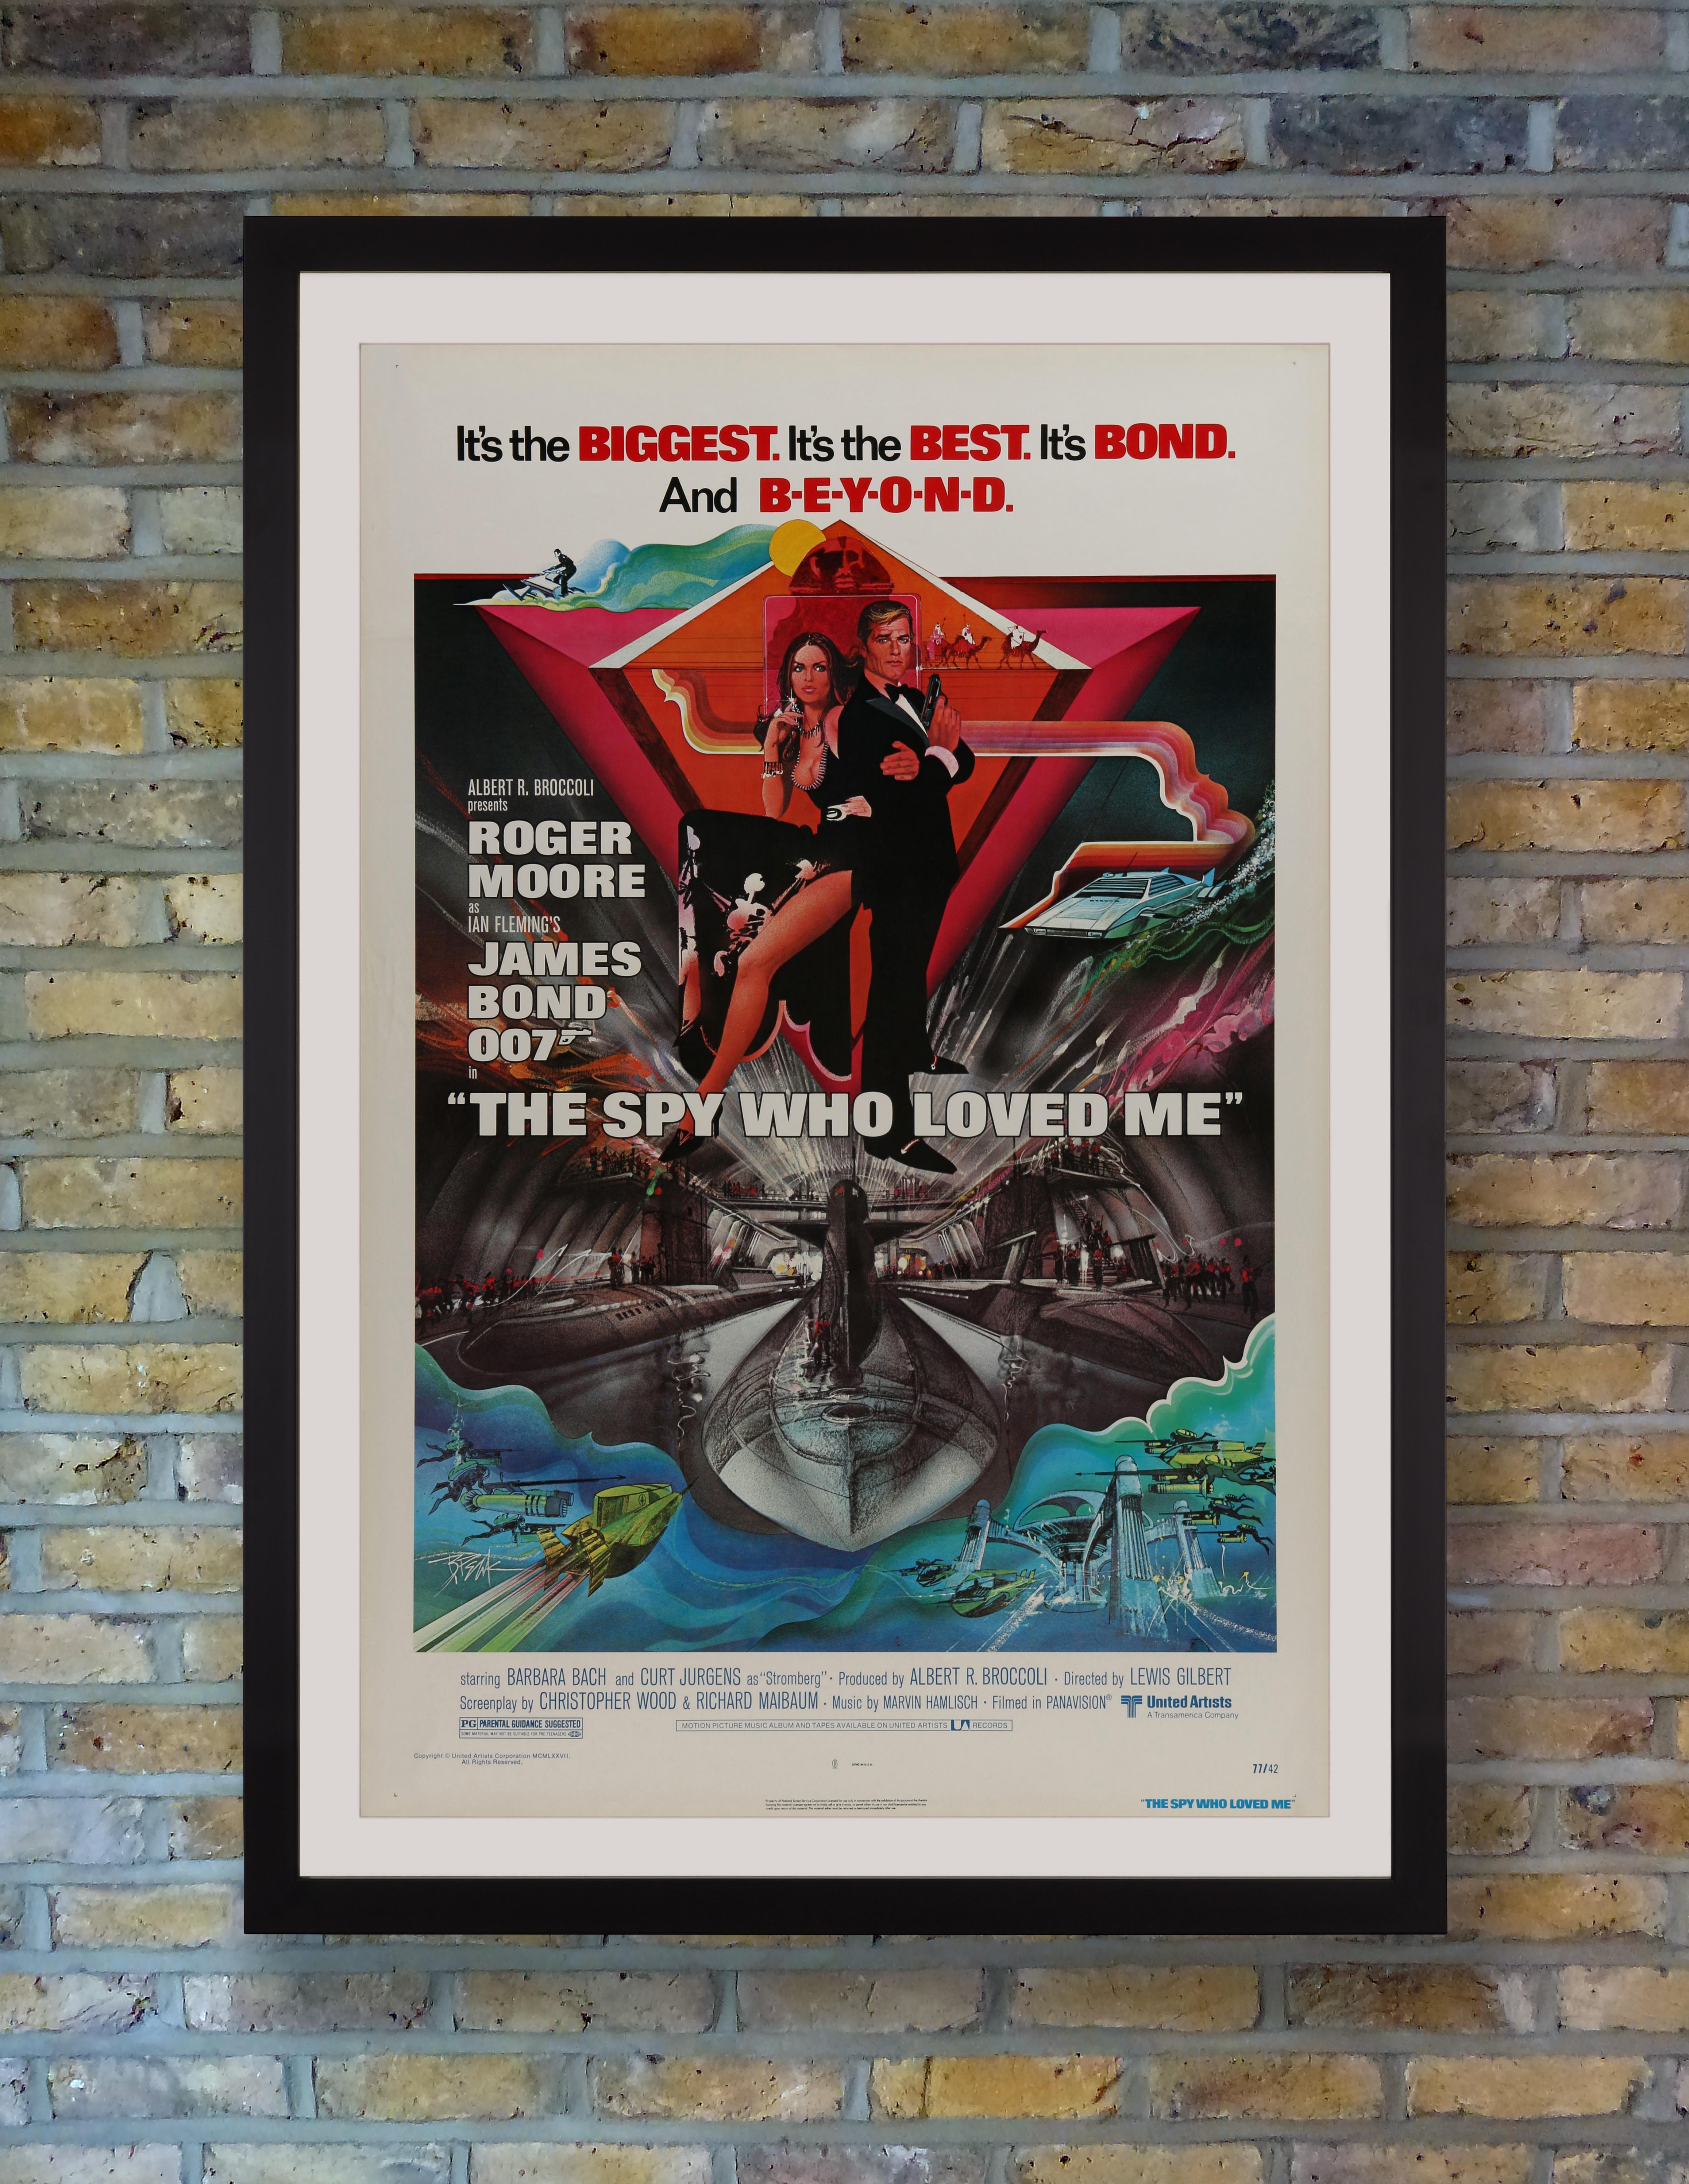 Considered Roger Moore's most memorable outing as 007, the tenth film in EON Productions' James Bond series was bigger than ever. In a globe-trotting adventure, Bond hops from a snowy ski chase to the Egyptian pyramids, teaming up with Russian agent